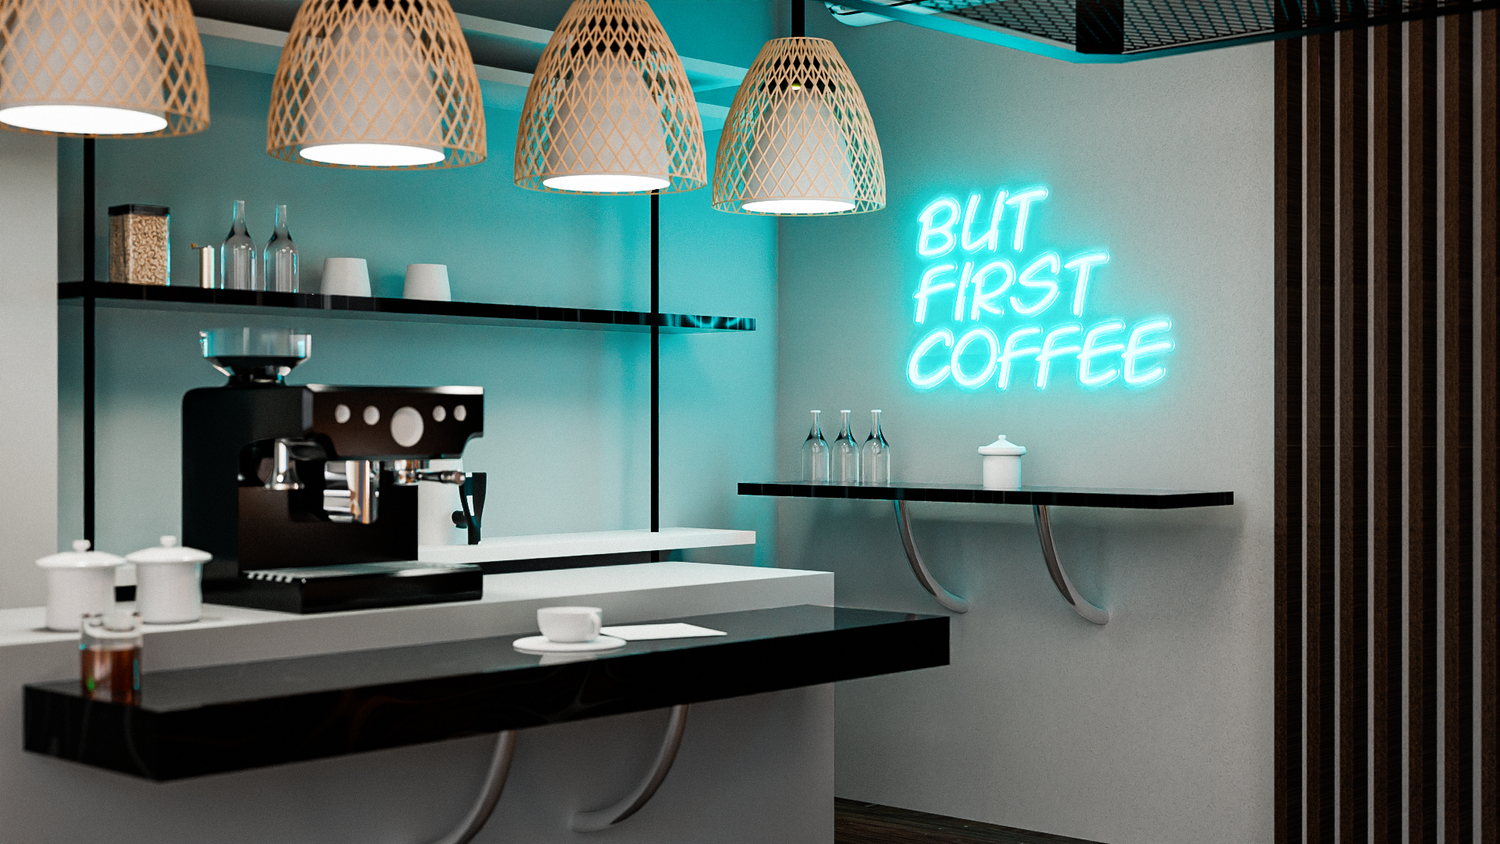 a blue neon sign in a cafe that says "but first coffee"